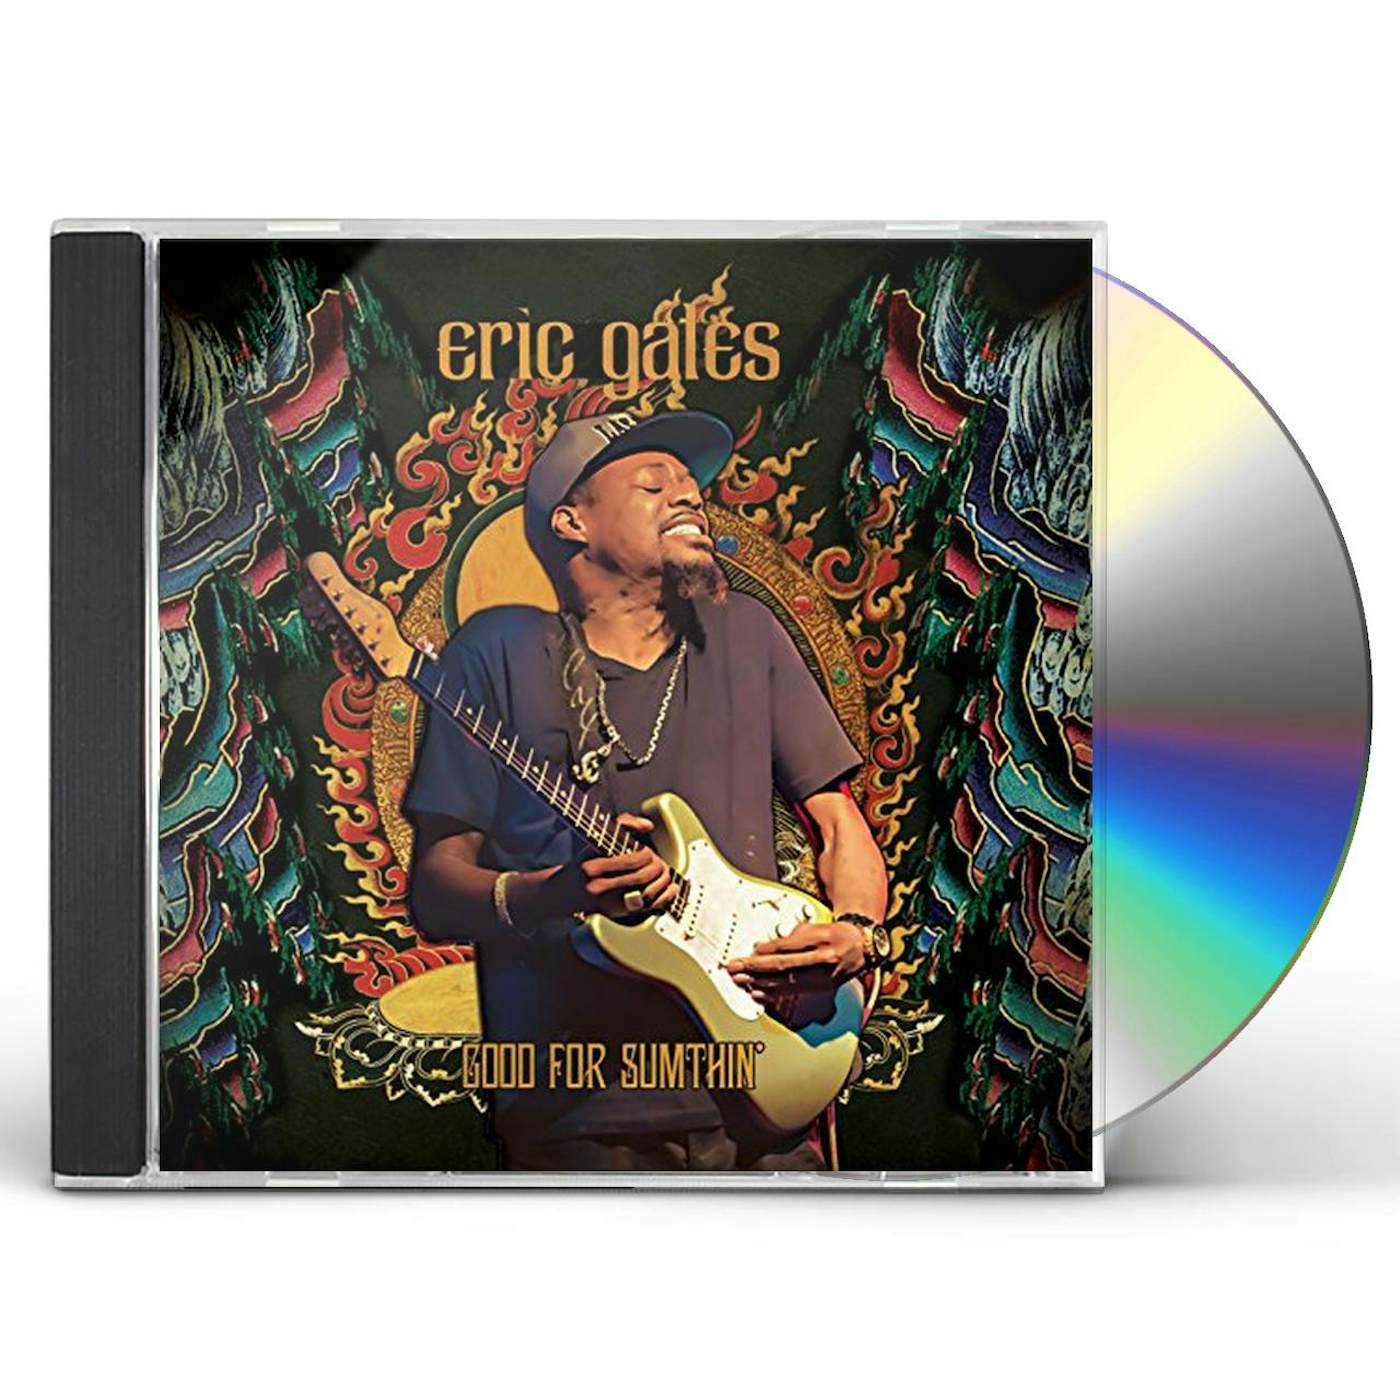 Eric Gales GOOD FOR SUMTHIN' CD